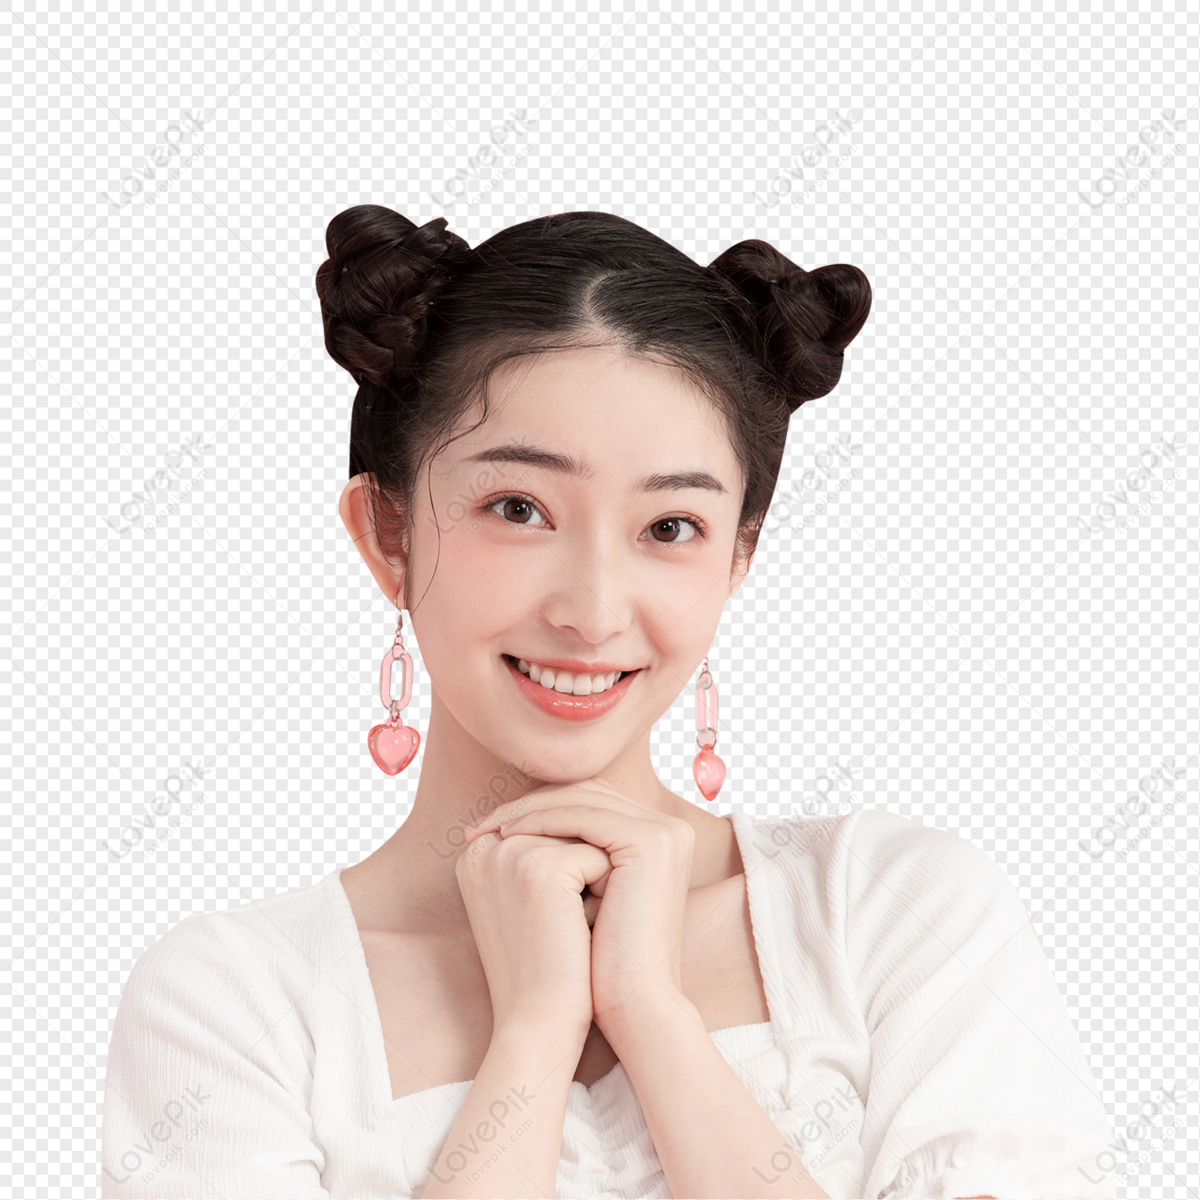 Cute Girl PNG Image for Free Download